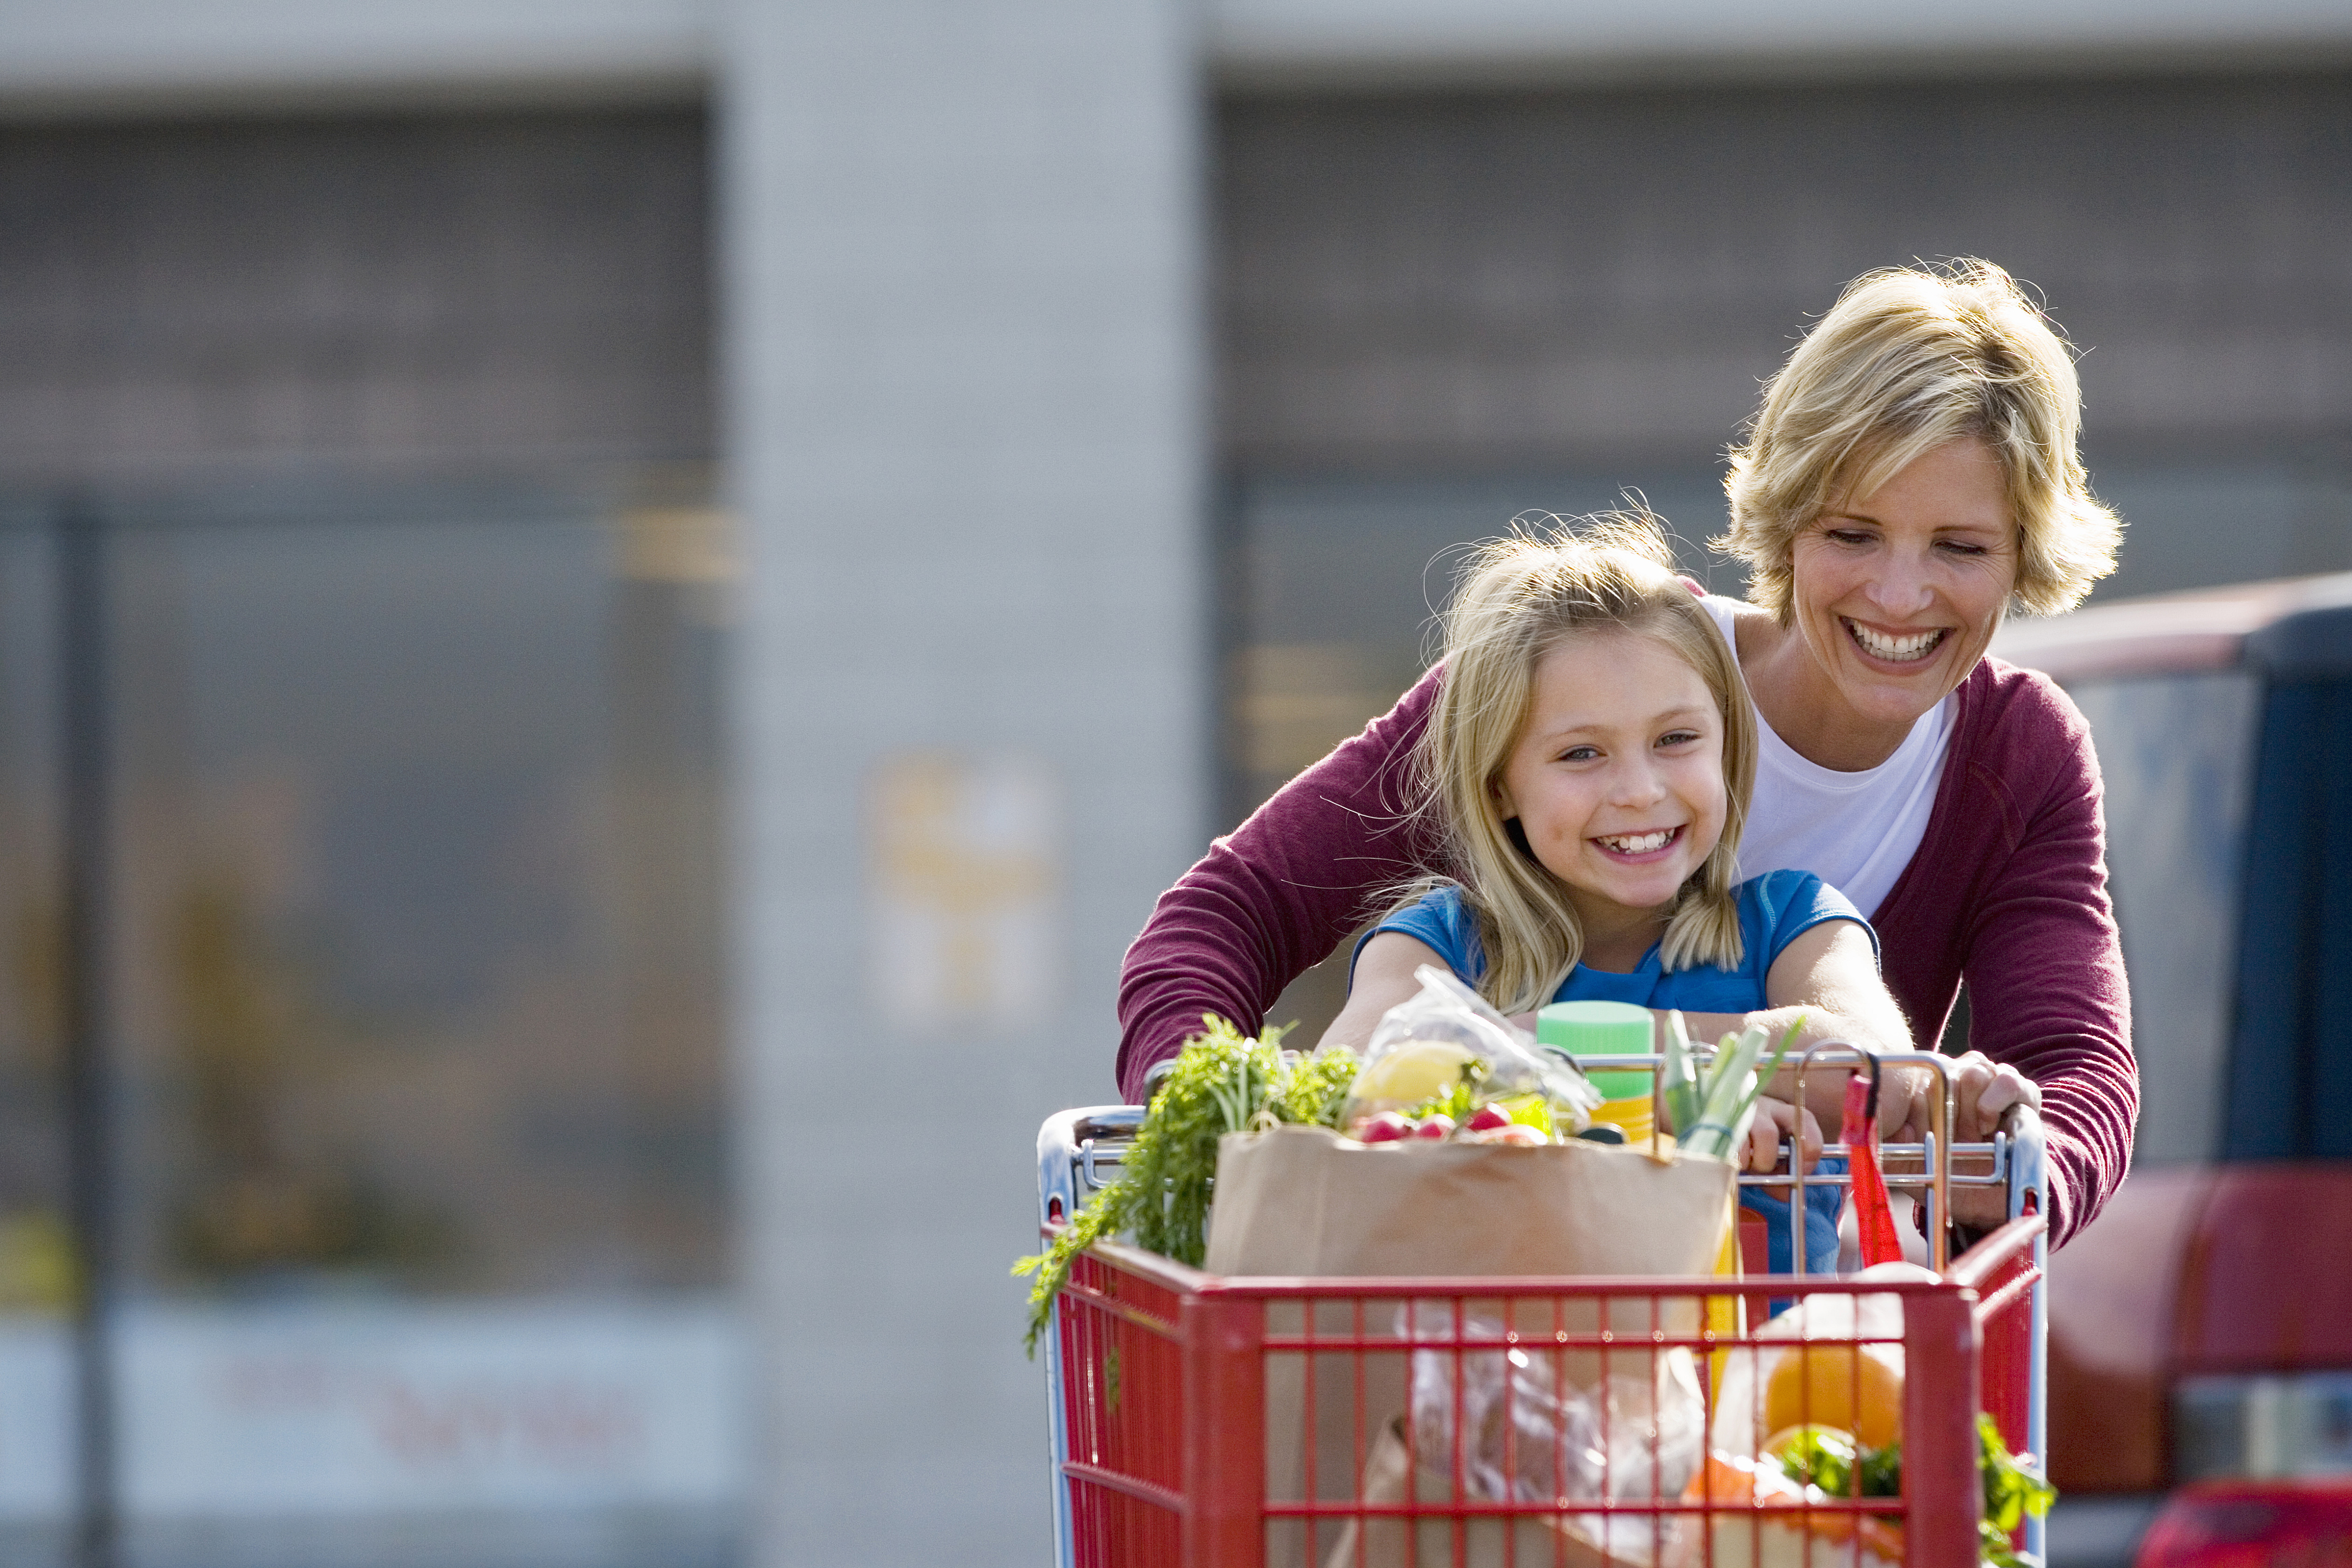 Mother and daughter pushing shopping trolley in supermarket car park, smiling, front view, portrait